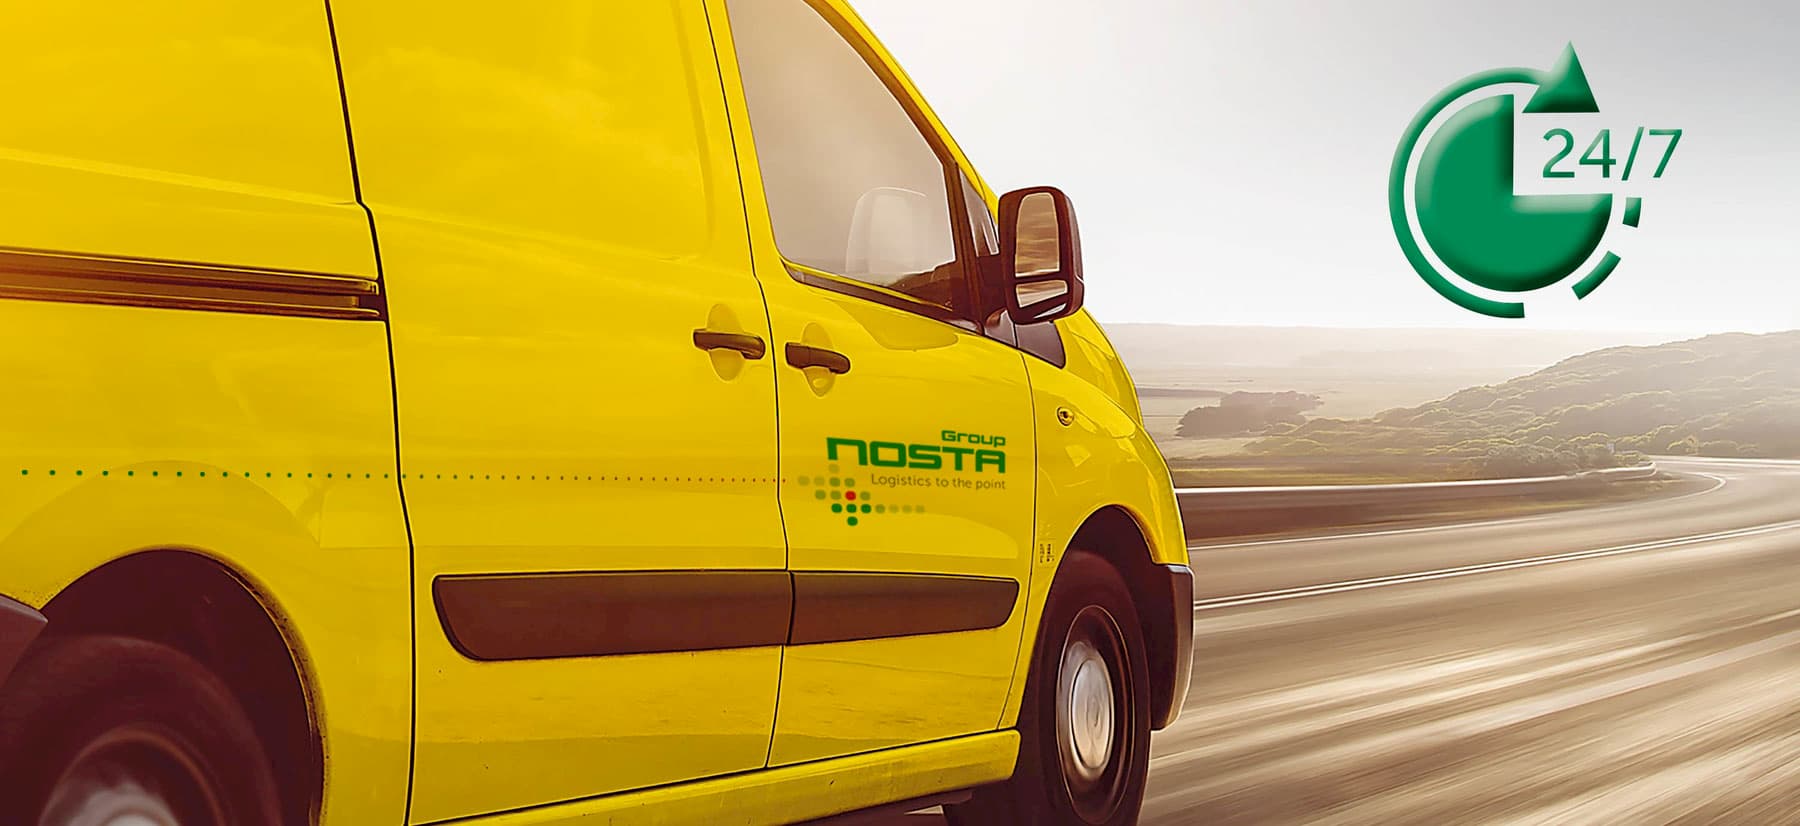 Express transport of the NOSTA Group